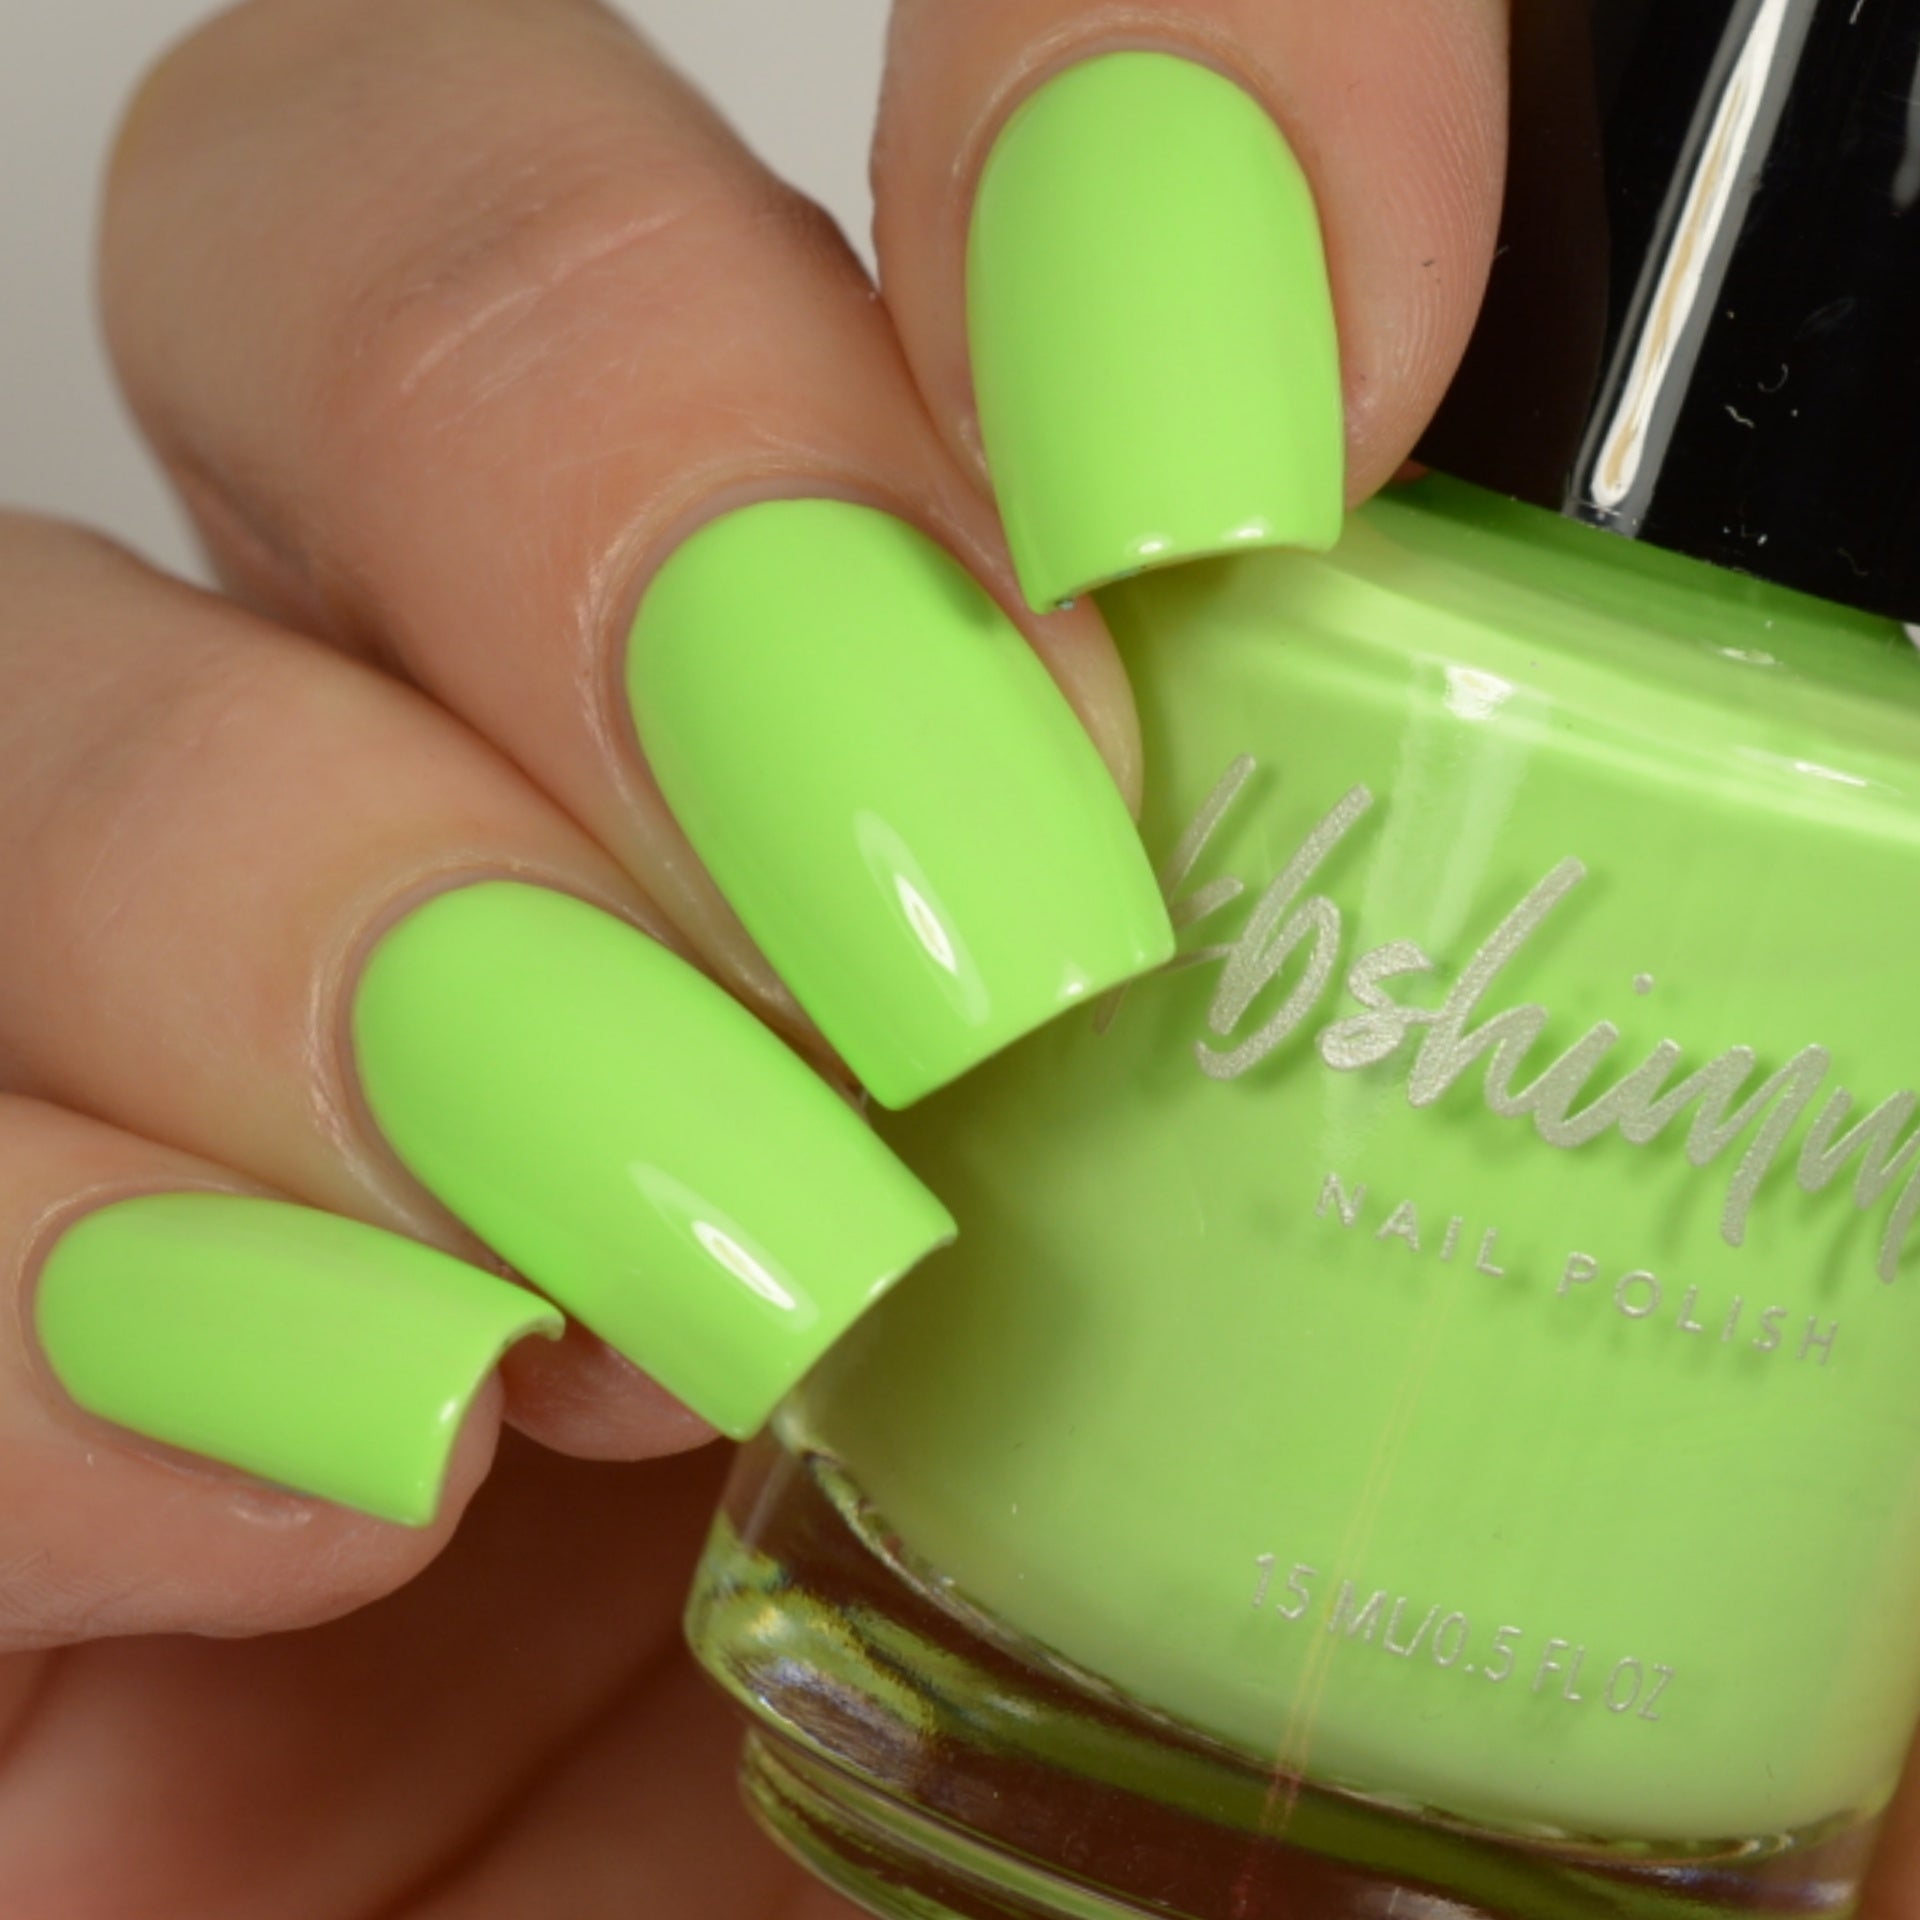 Manicure of the Month: Neon Green Nails - living after midnite